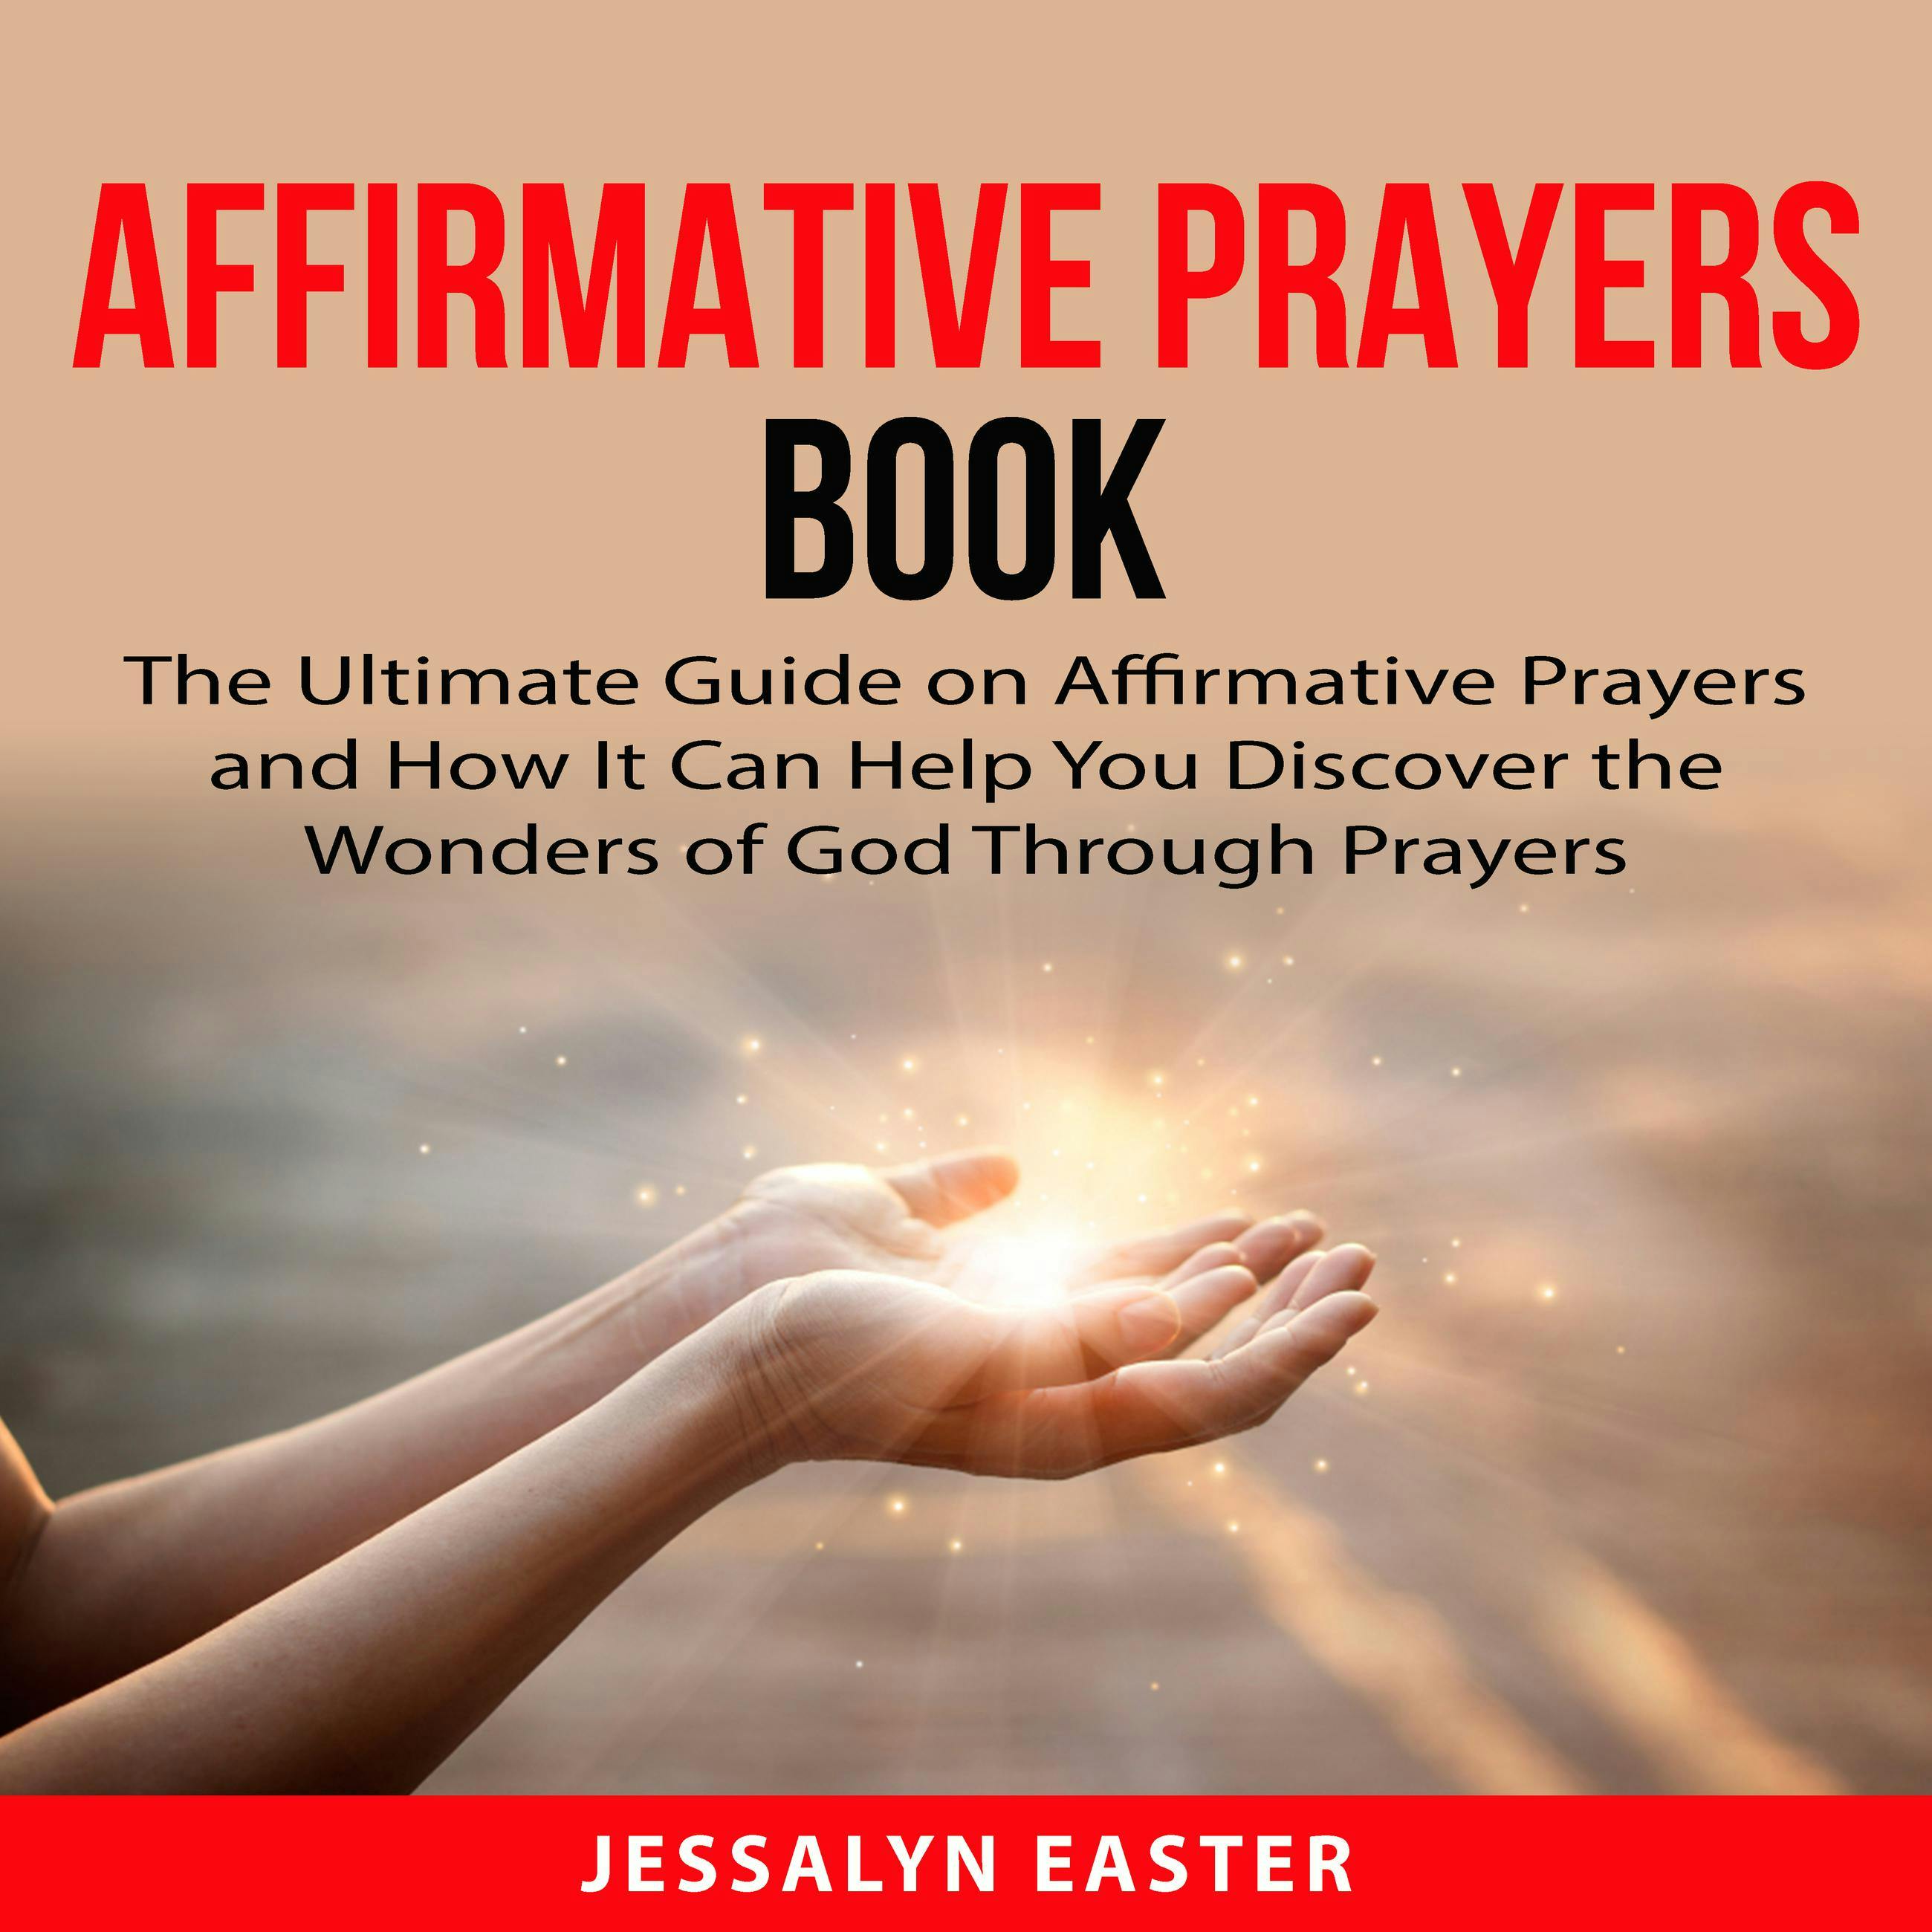 Affirmative Prayers Book: The Ultimate Guide on Affirmative Prayers and How It Can Help You Discover the Wonders of God Through Prayers - undefined